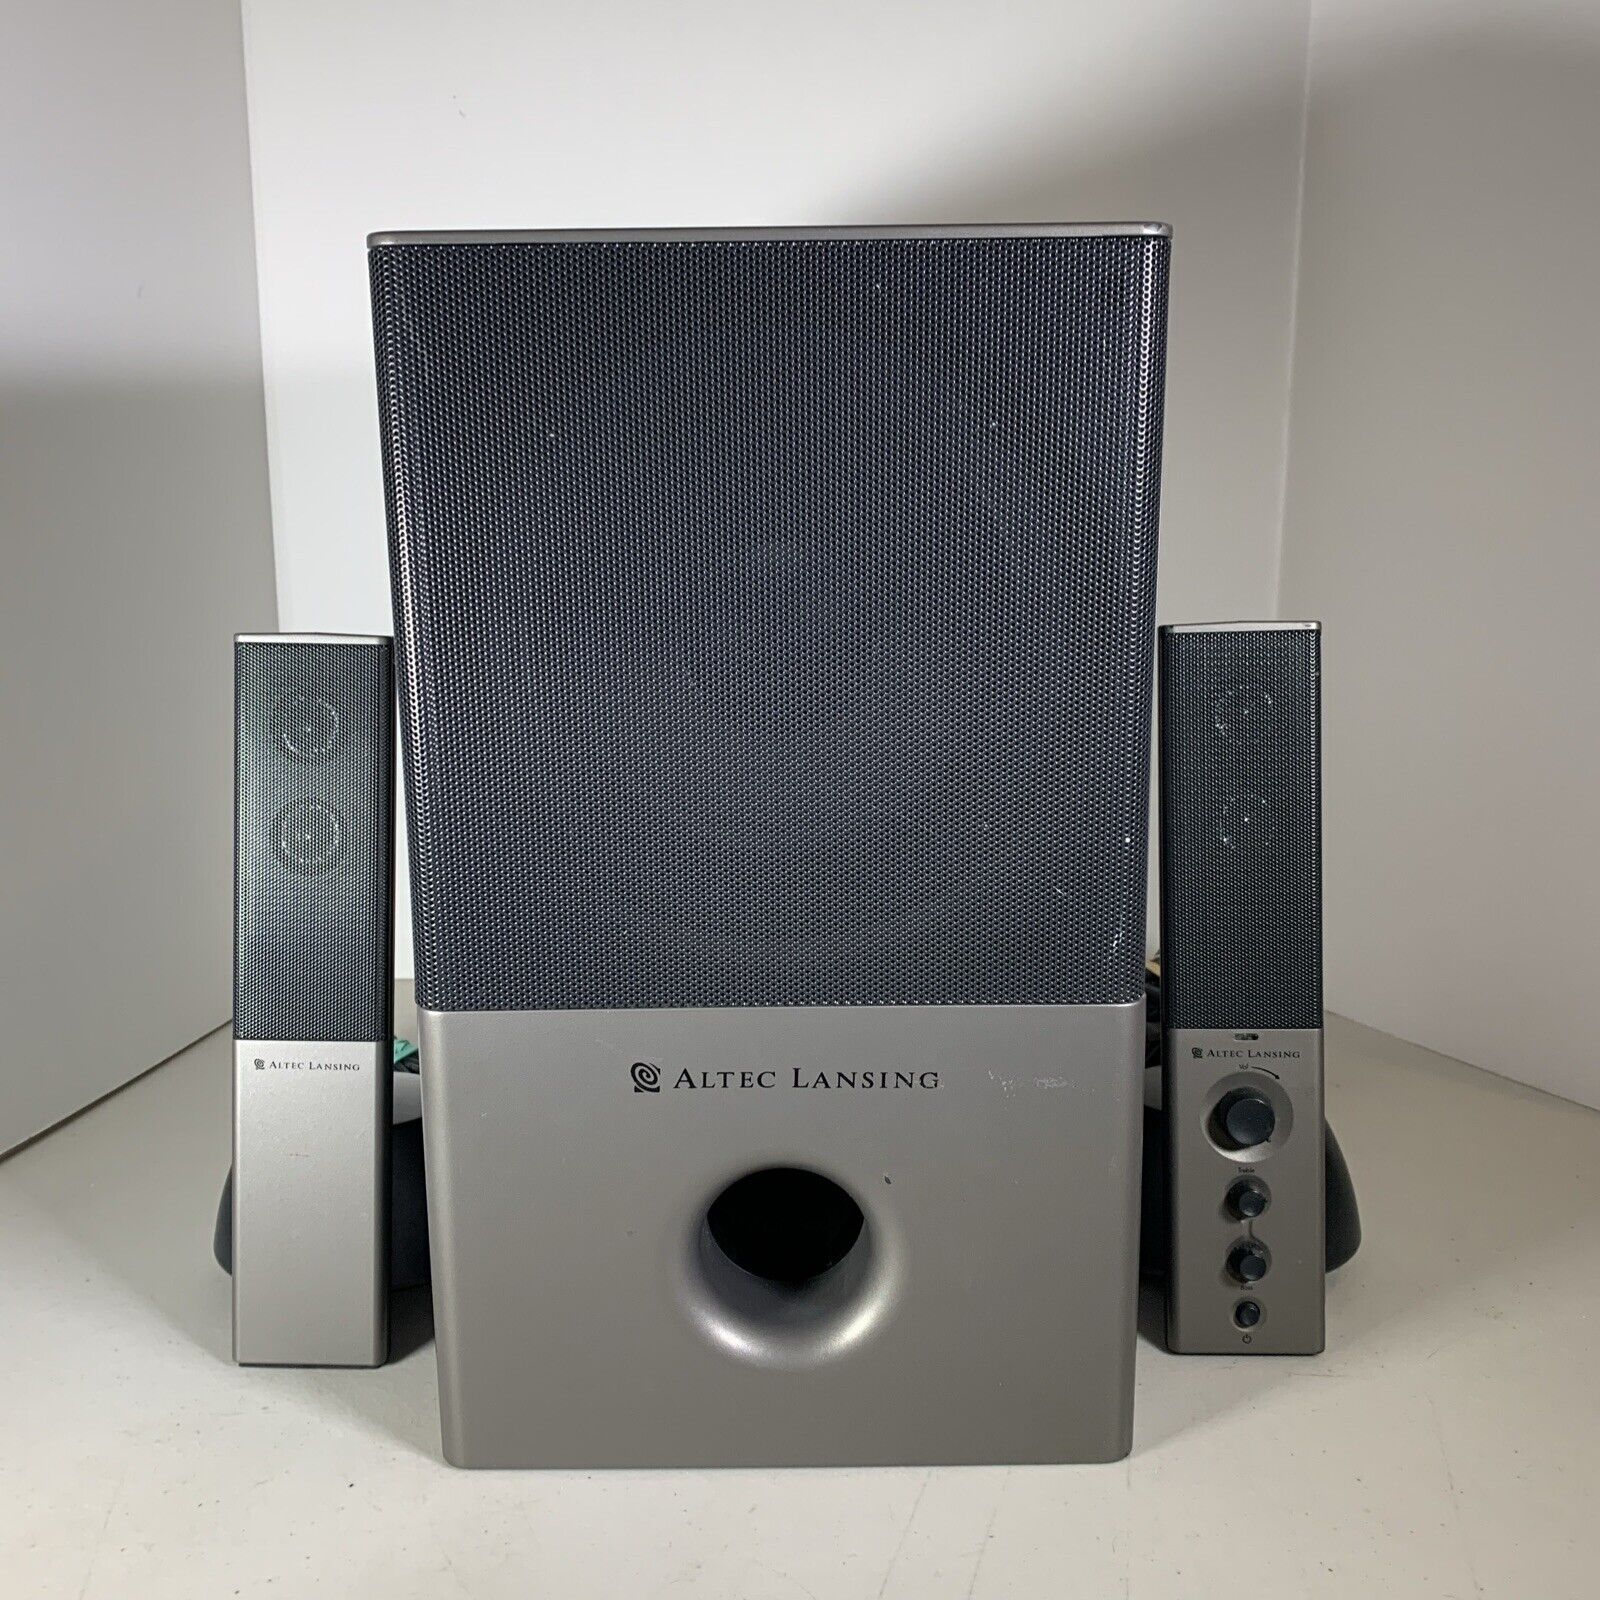 Altec Lansing VS4121 Home Theater Quality Computer Speakers With Subwoofer